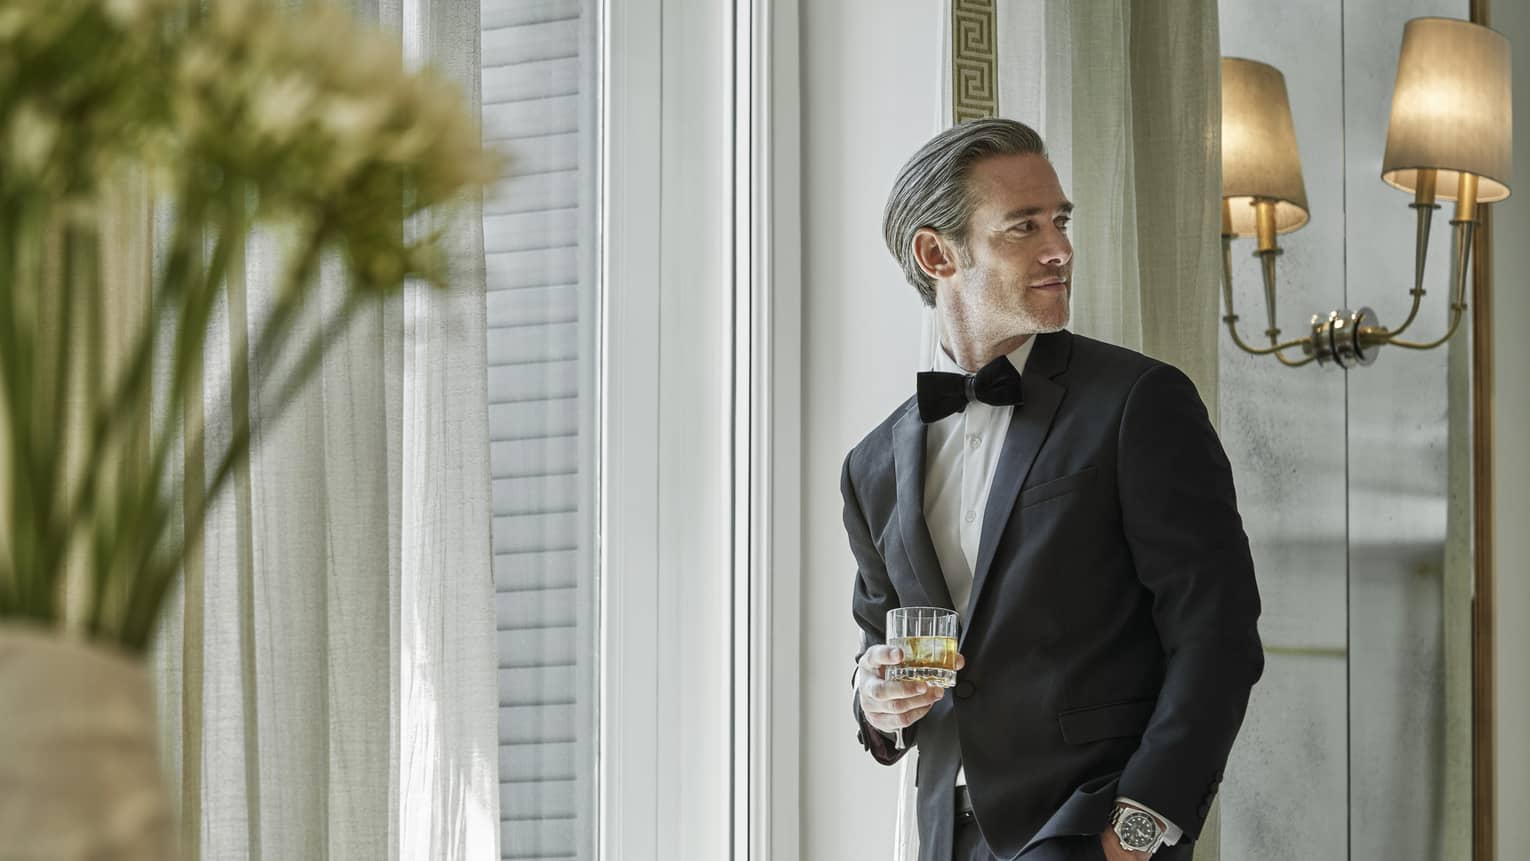 A man in a black tuxedo holds a glass of whiskey while waiting in a white doorway.